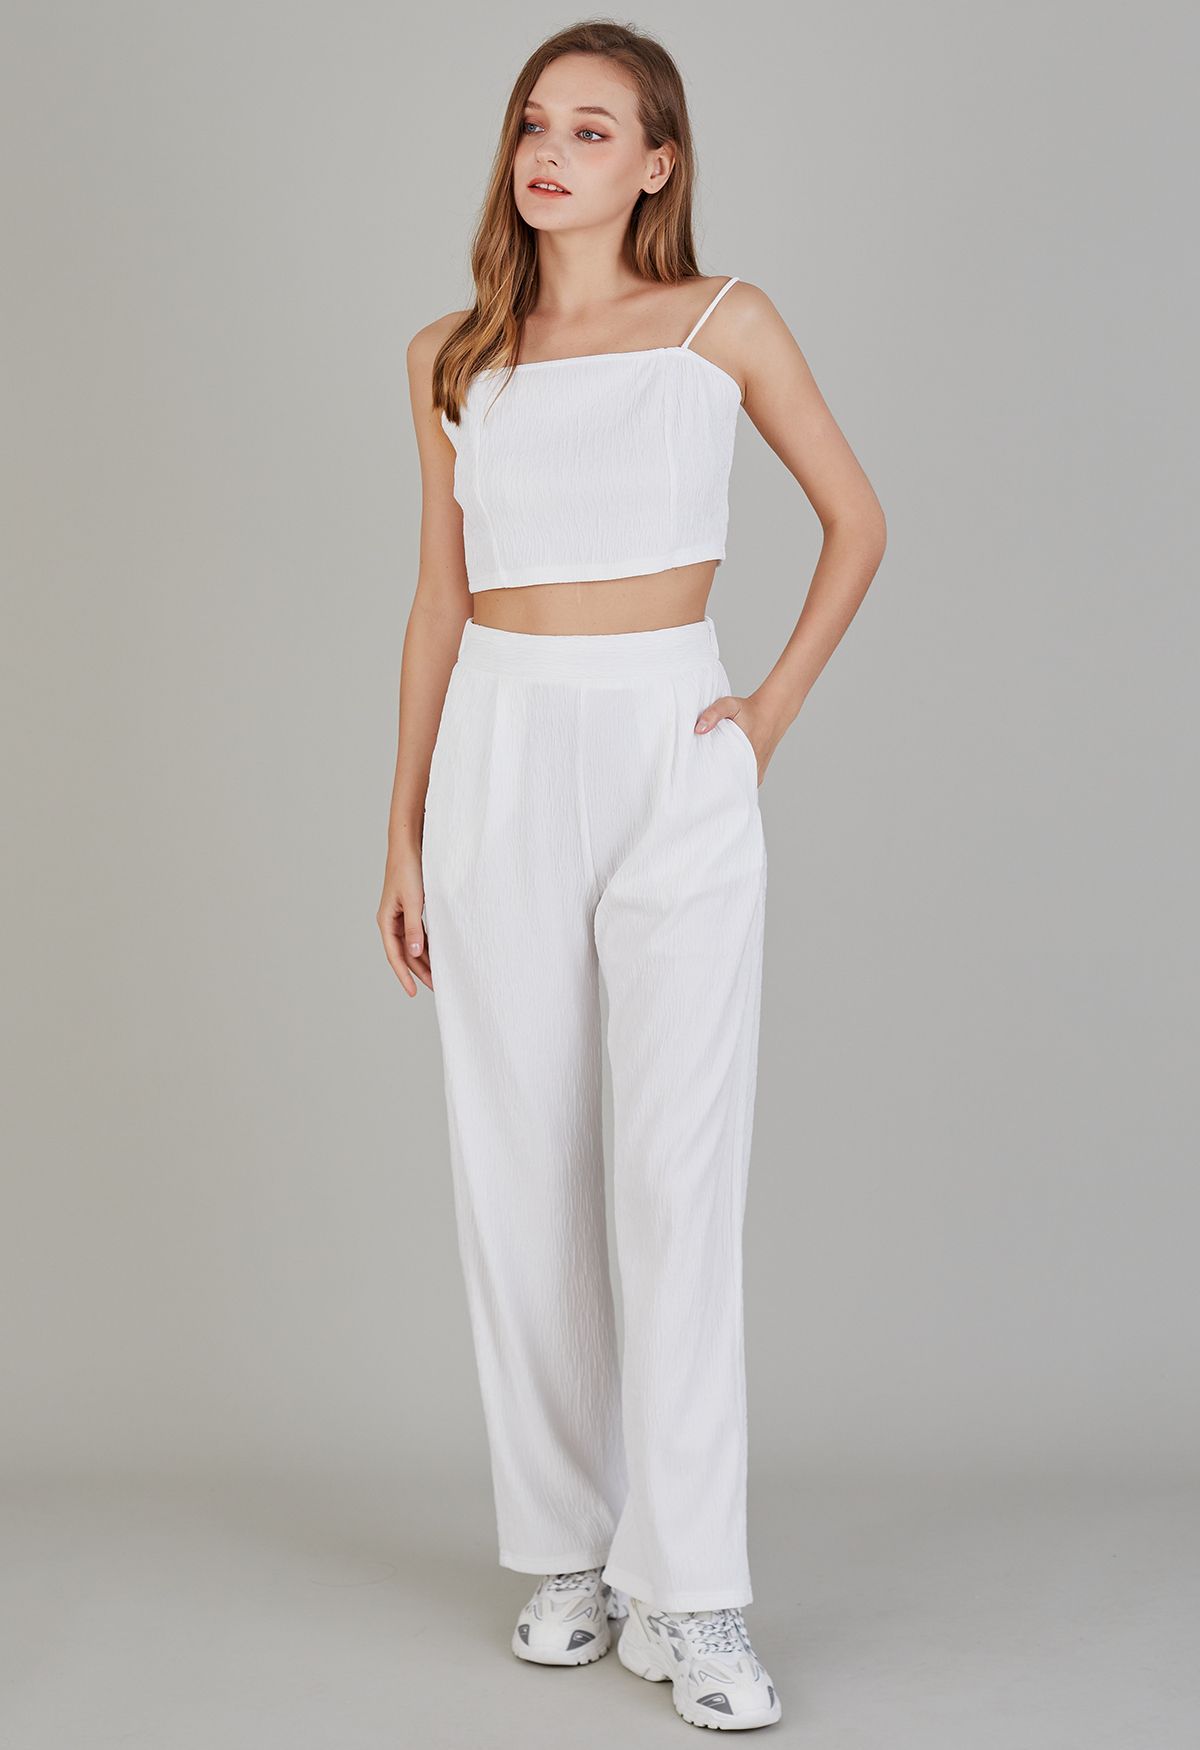 Embossed Texture Cami Crop Top and Pants Set | Chicwish